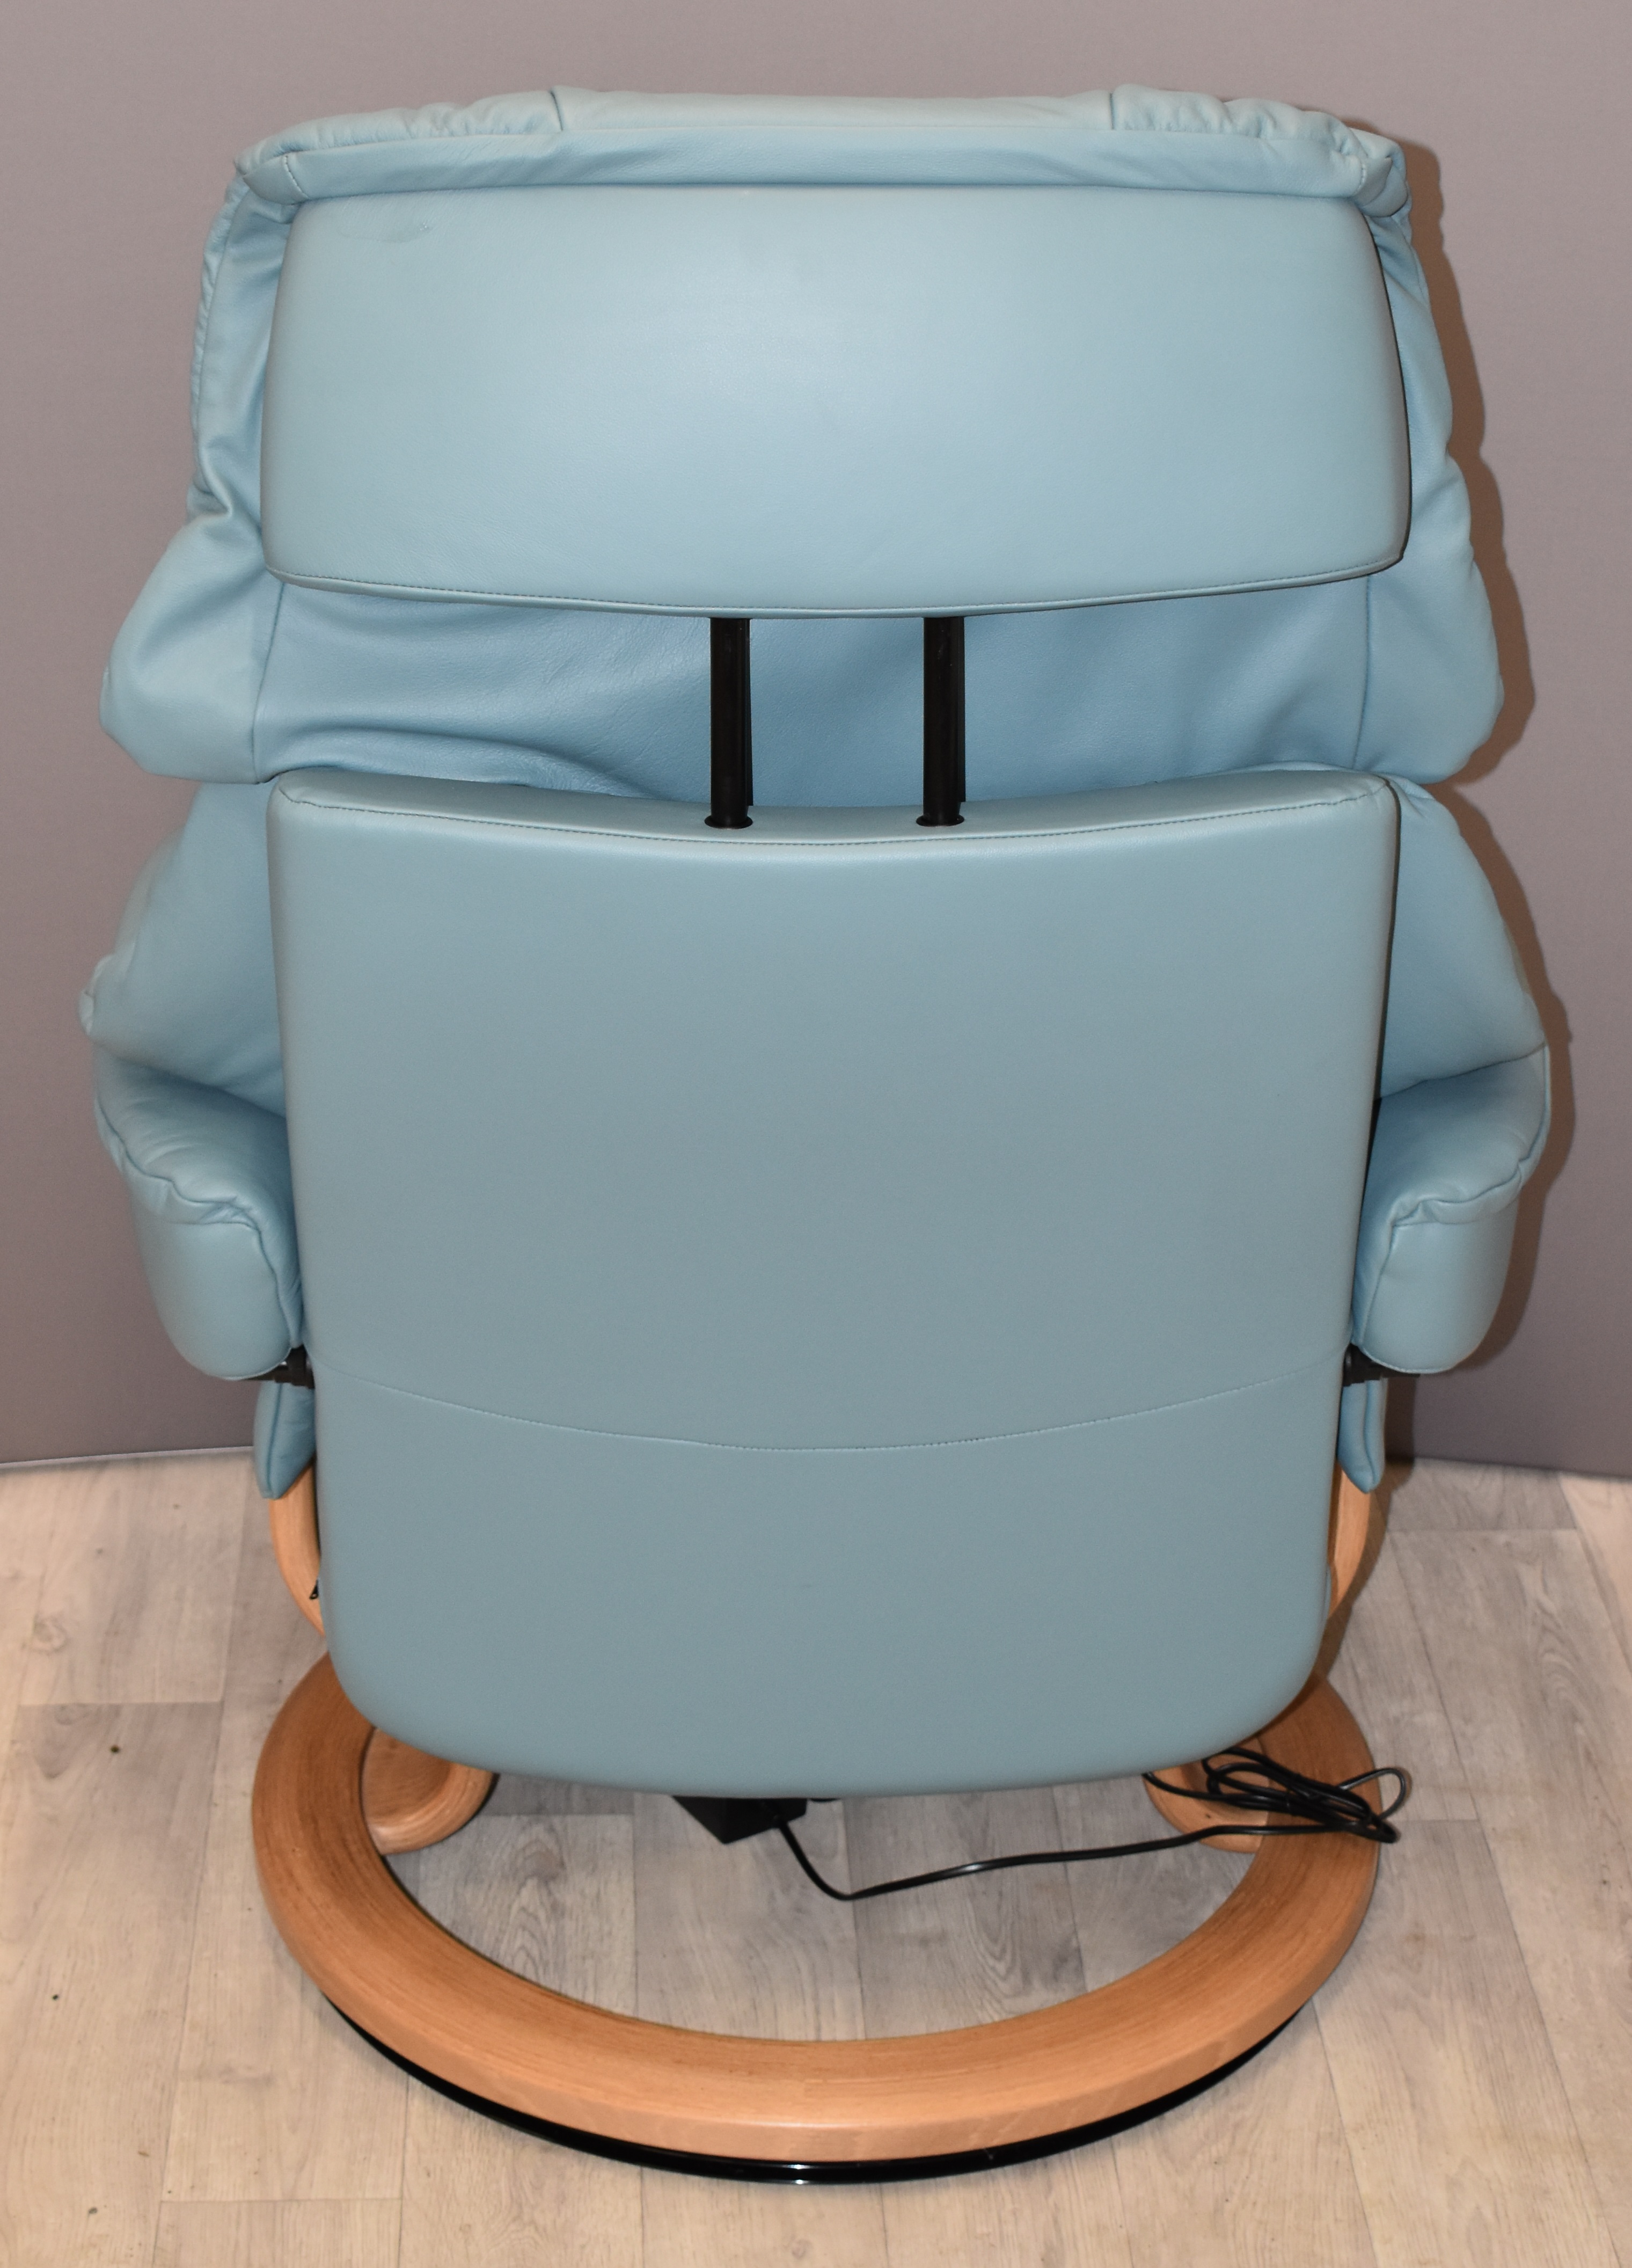 Stressless powered recliner armchair in blue, with power lead/adaptor - Image 3 of 3